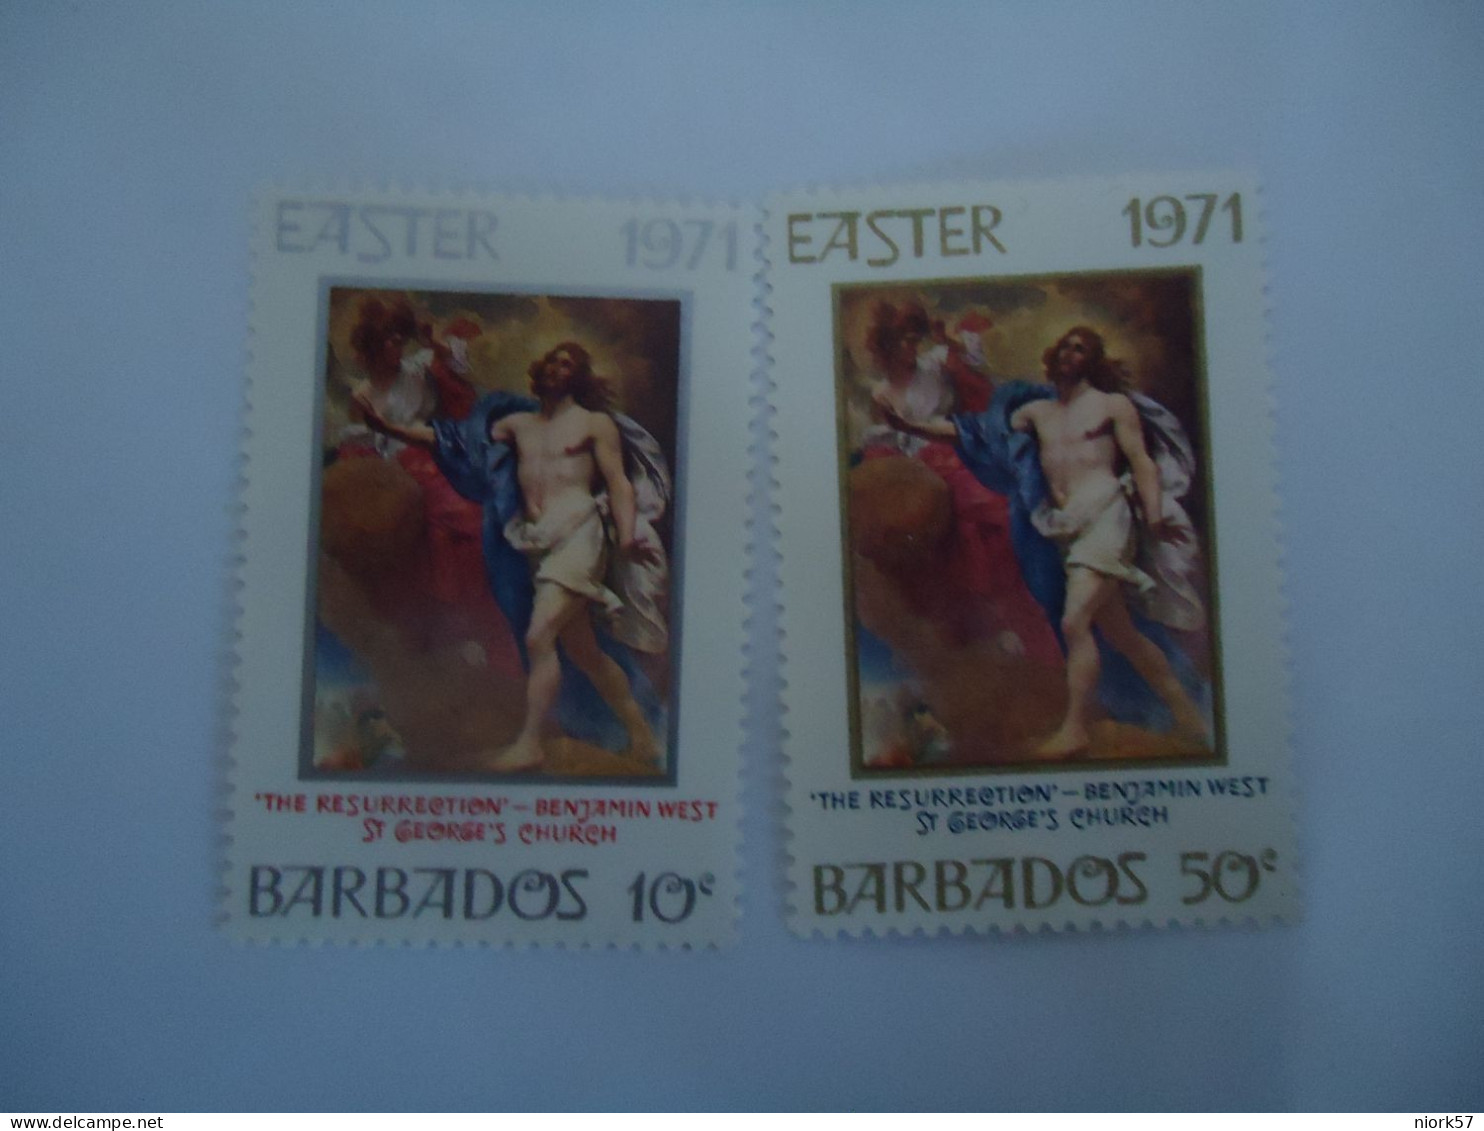 BARBADOS MNH SET 2 STAMPS   EASTER 1971  2 SCAN - Pascua